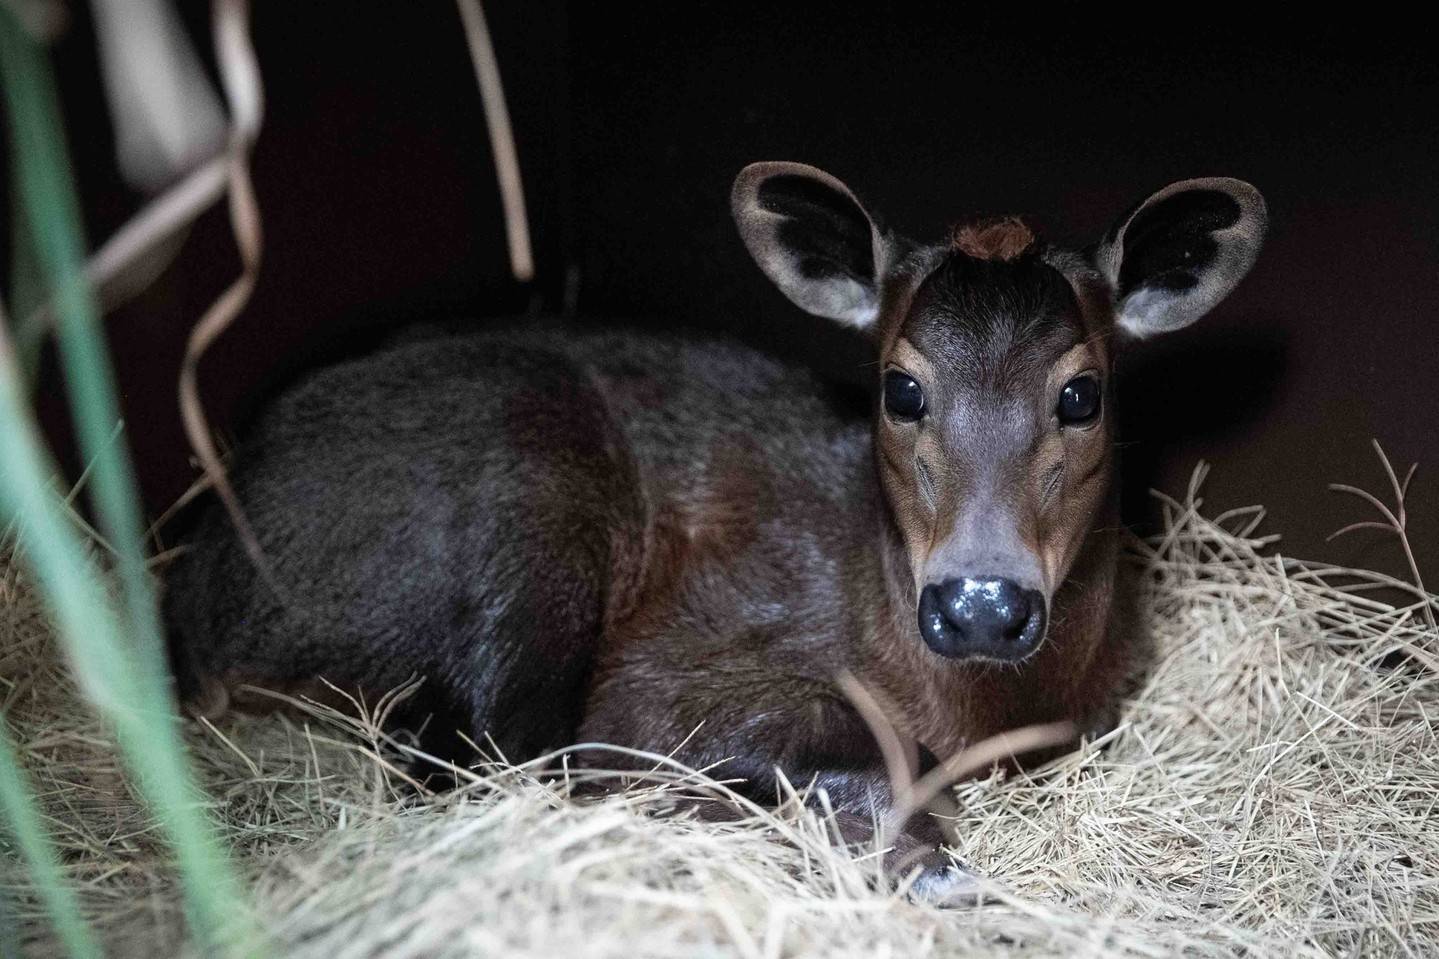 Baby animal news from Disney's Animal Kingdom - a Yellow-backed duiker calf has been born for the first time in 20 years